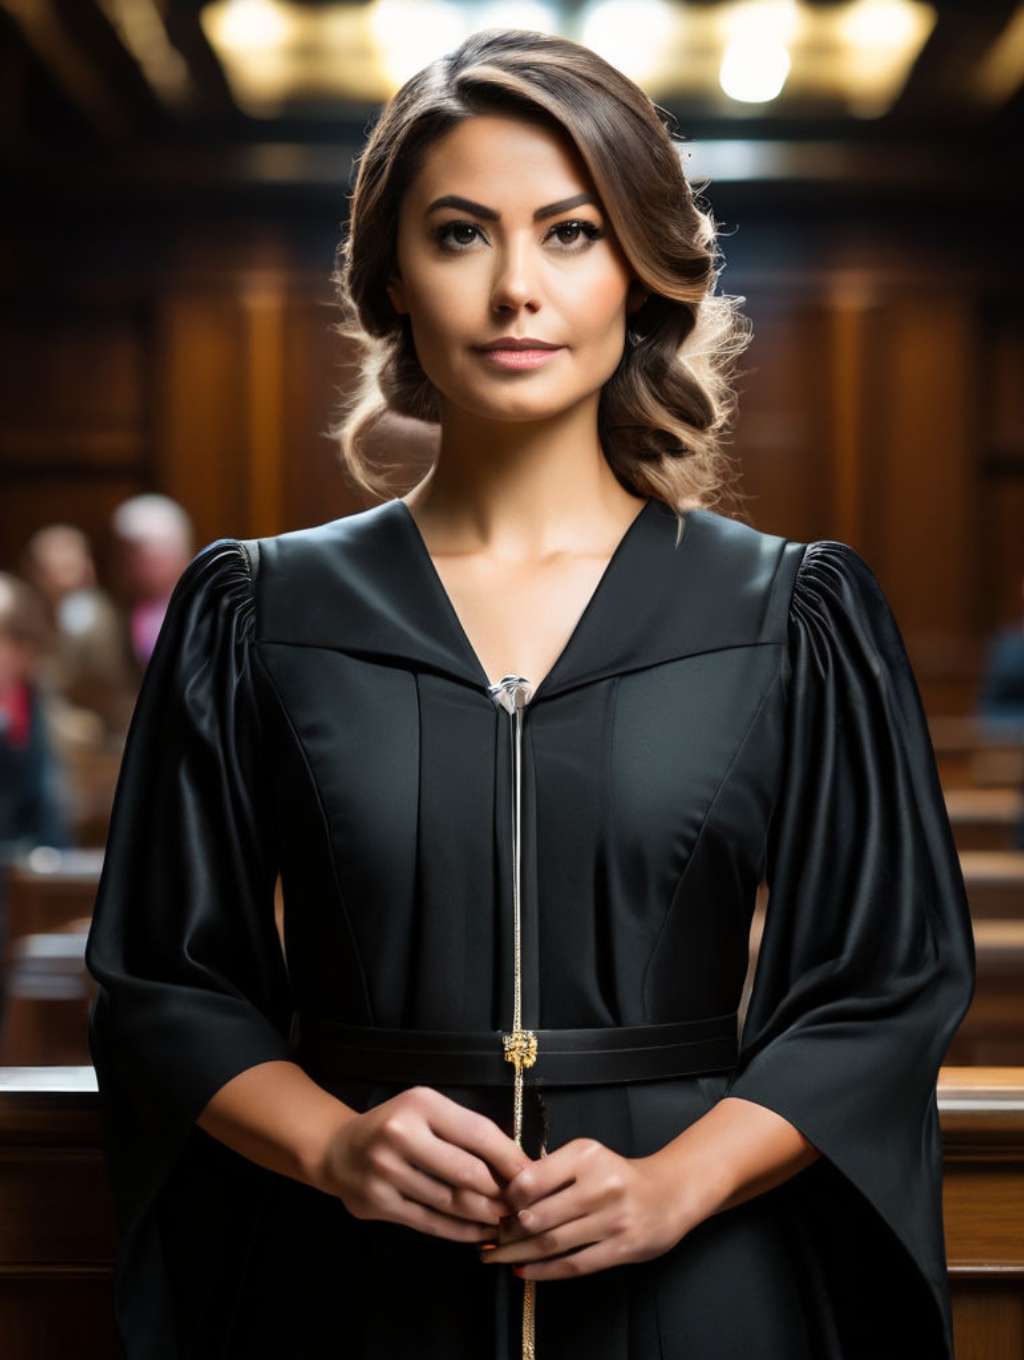 Lawyers & Judges Women: Profile Pictures & Wall Frames-Theme:1